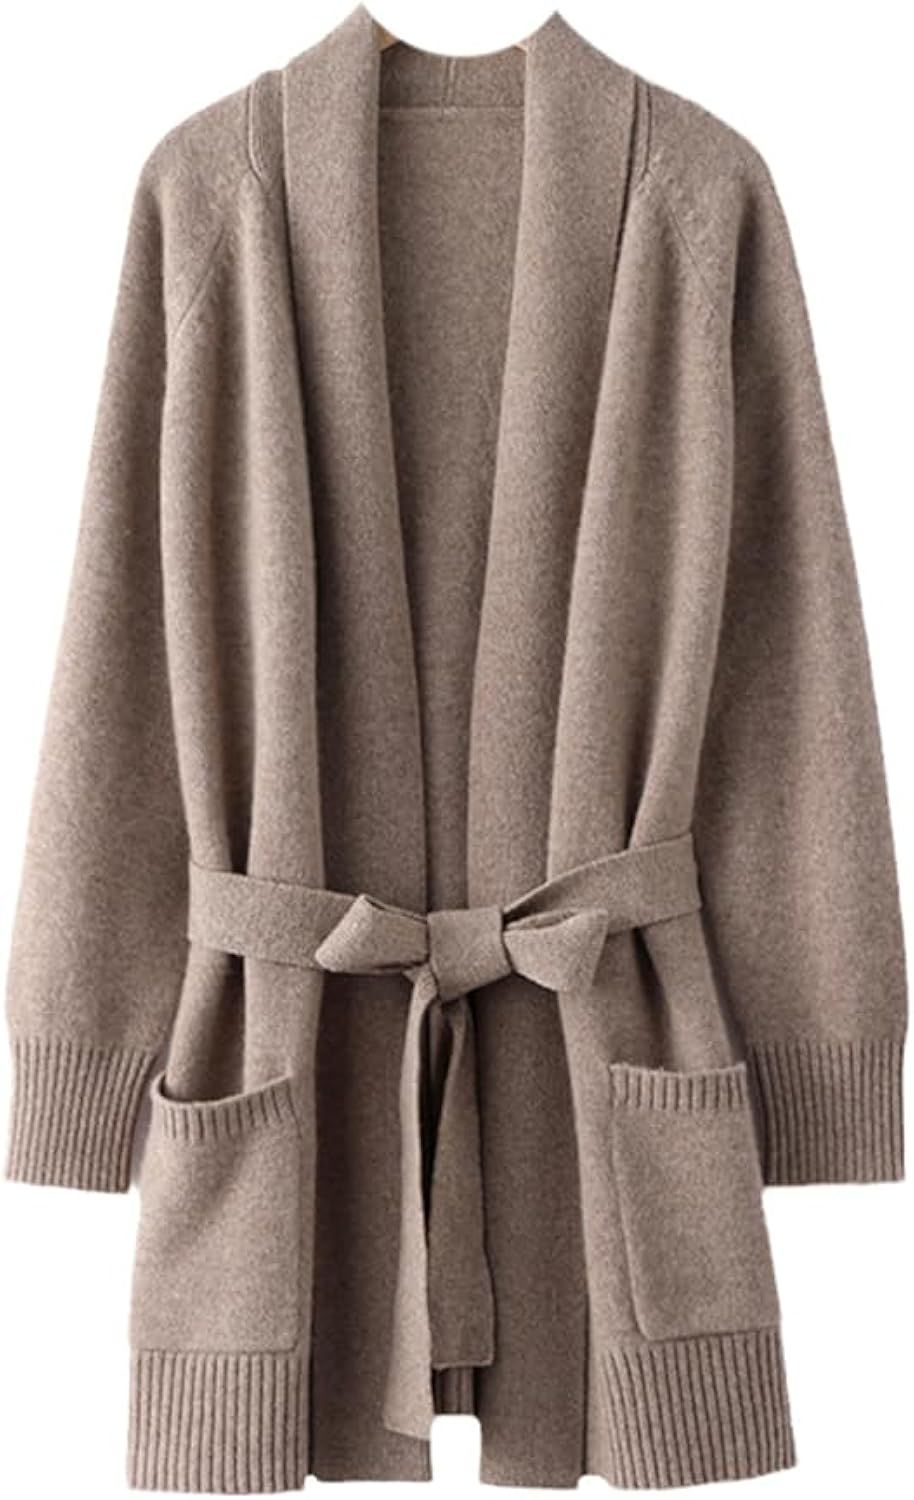 Autumn Winter Cashmere Cardigan Knitted Sweater Women's Soft Loose Cardigans | Amazon (US)